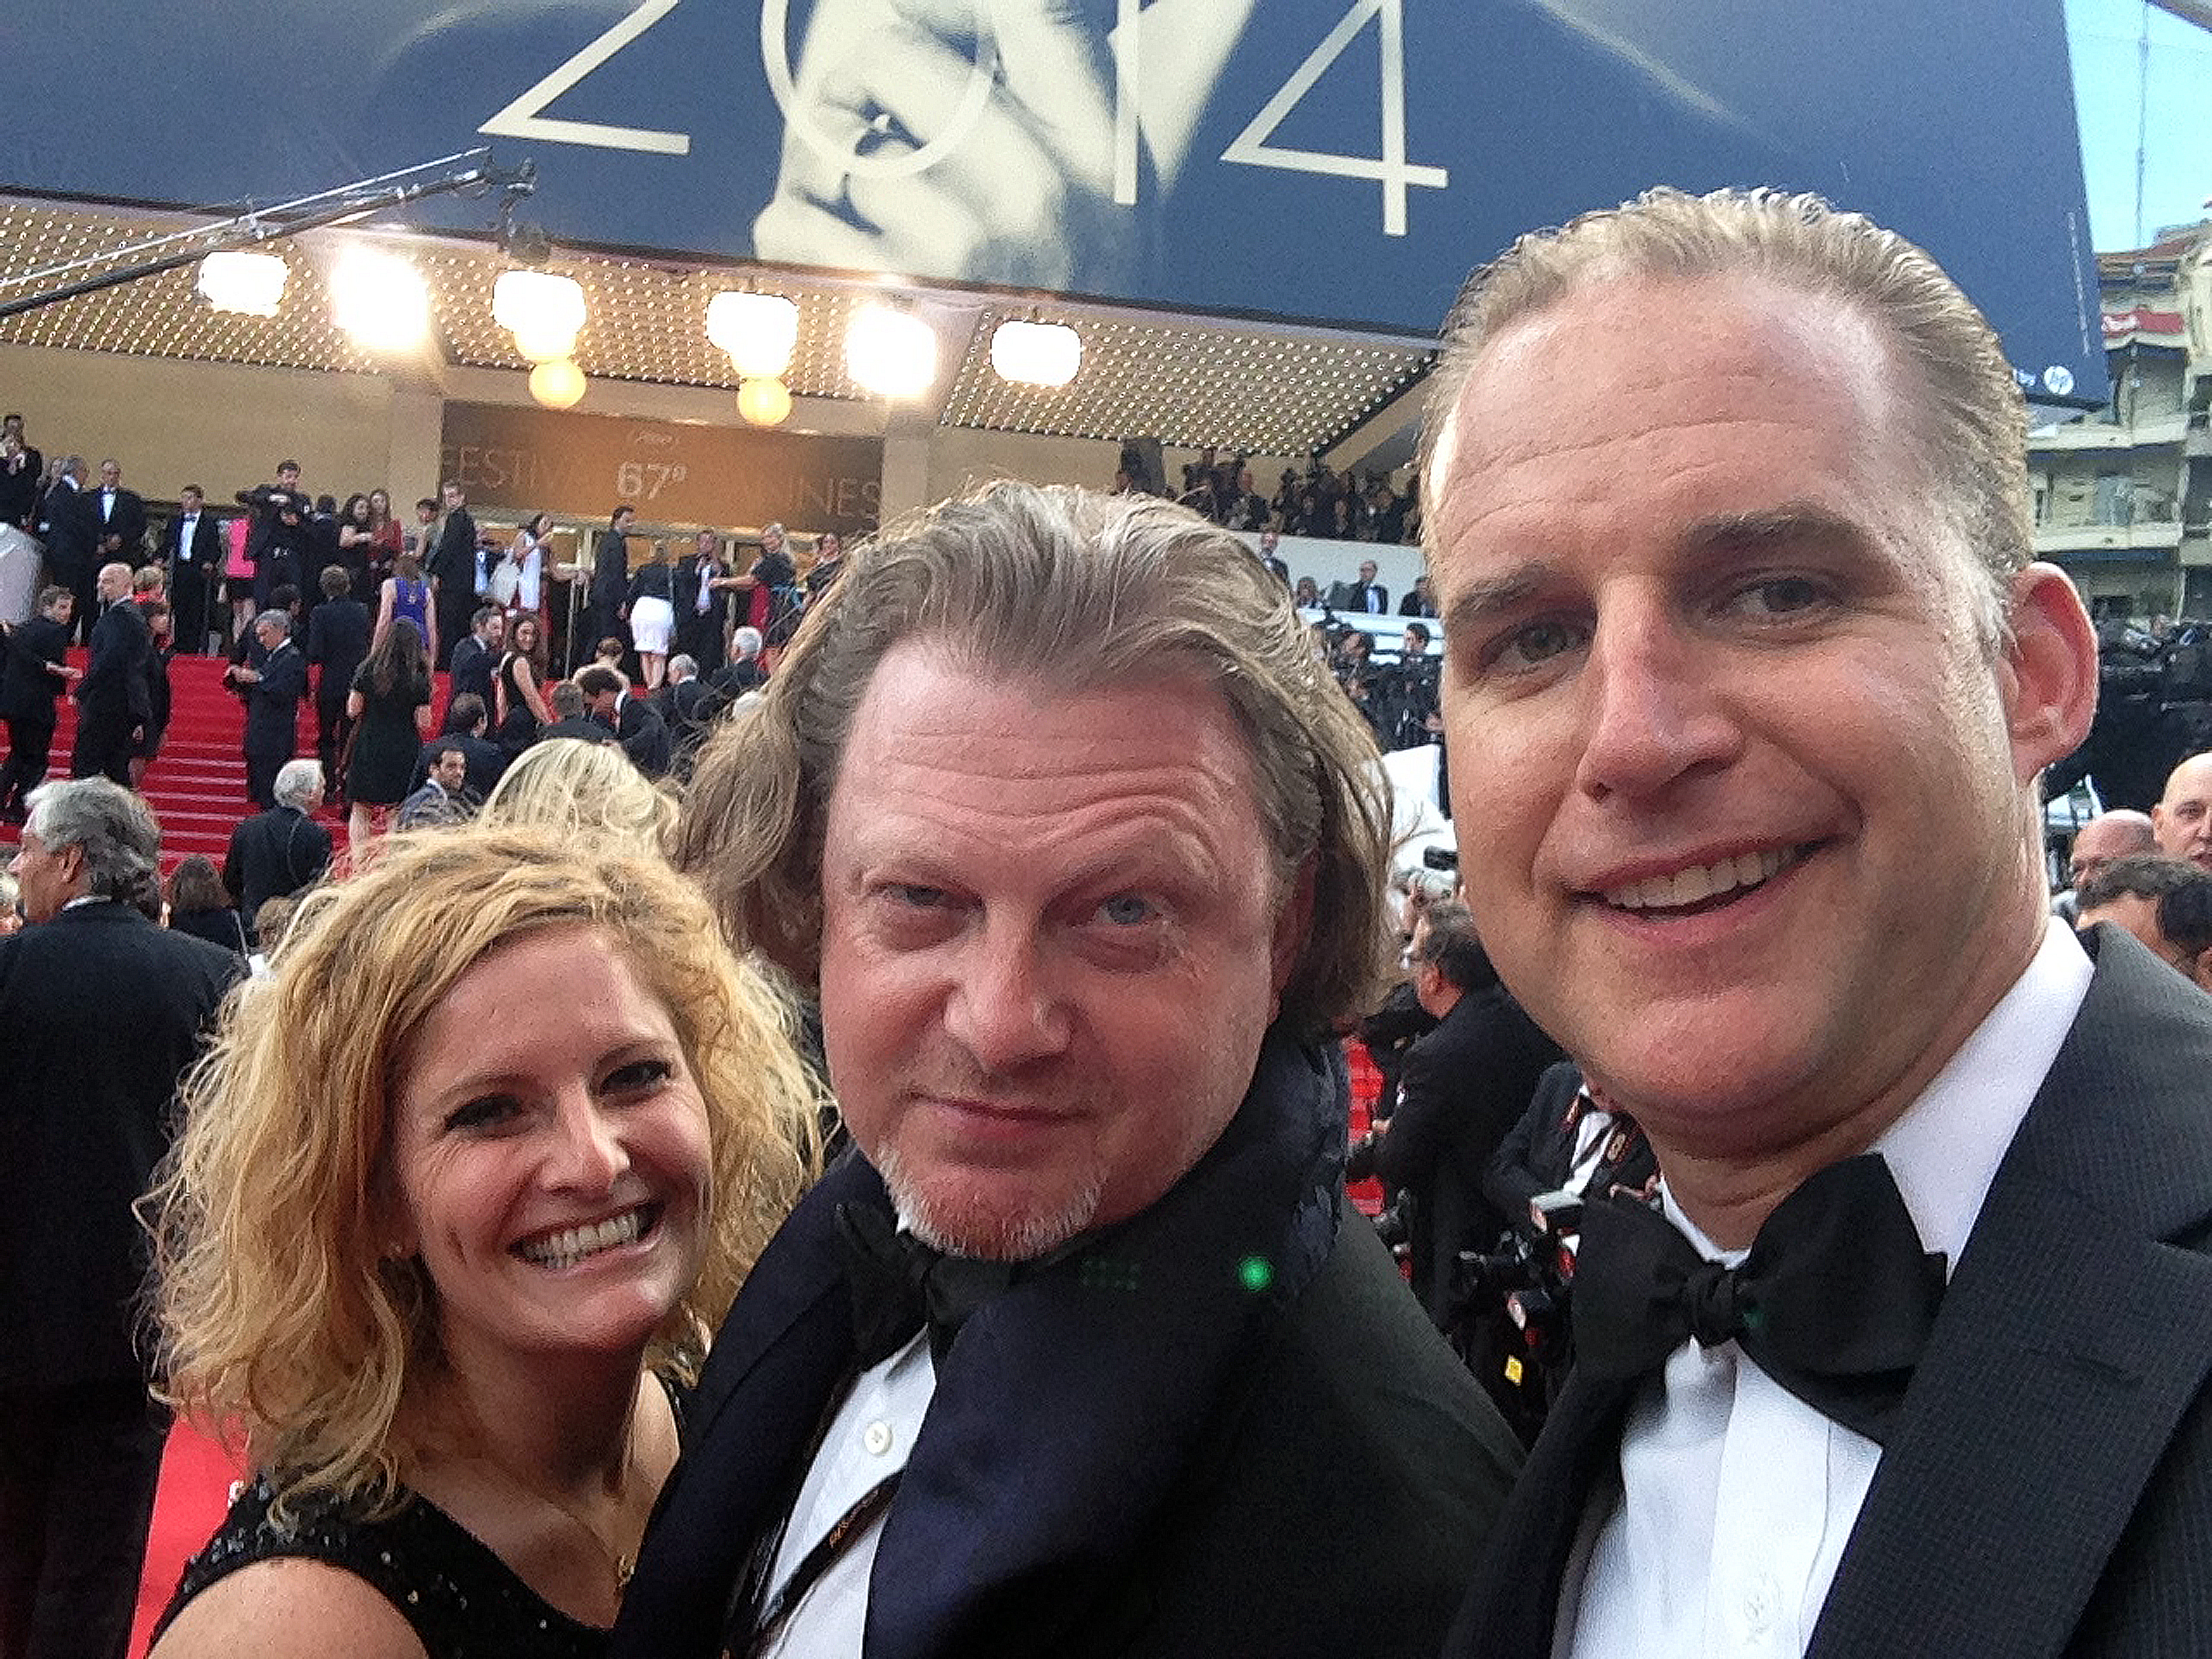 2014 walking the carpet at Cannes!